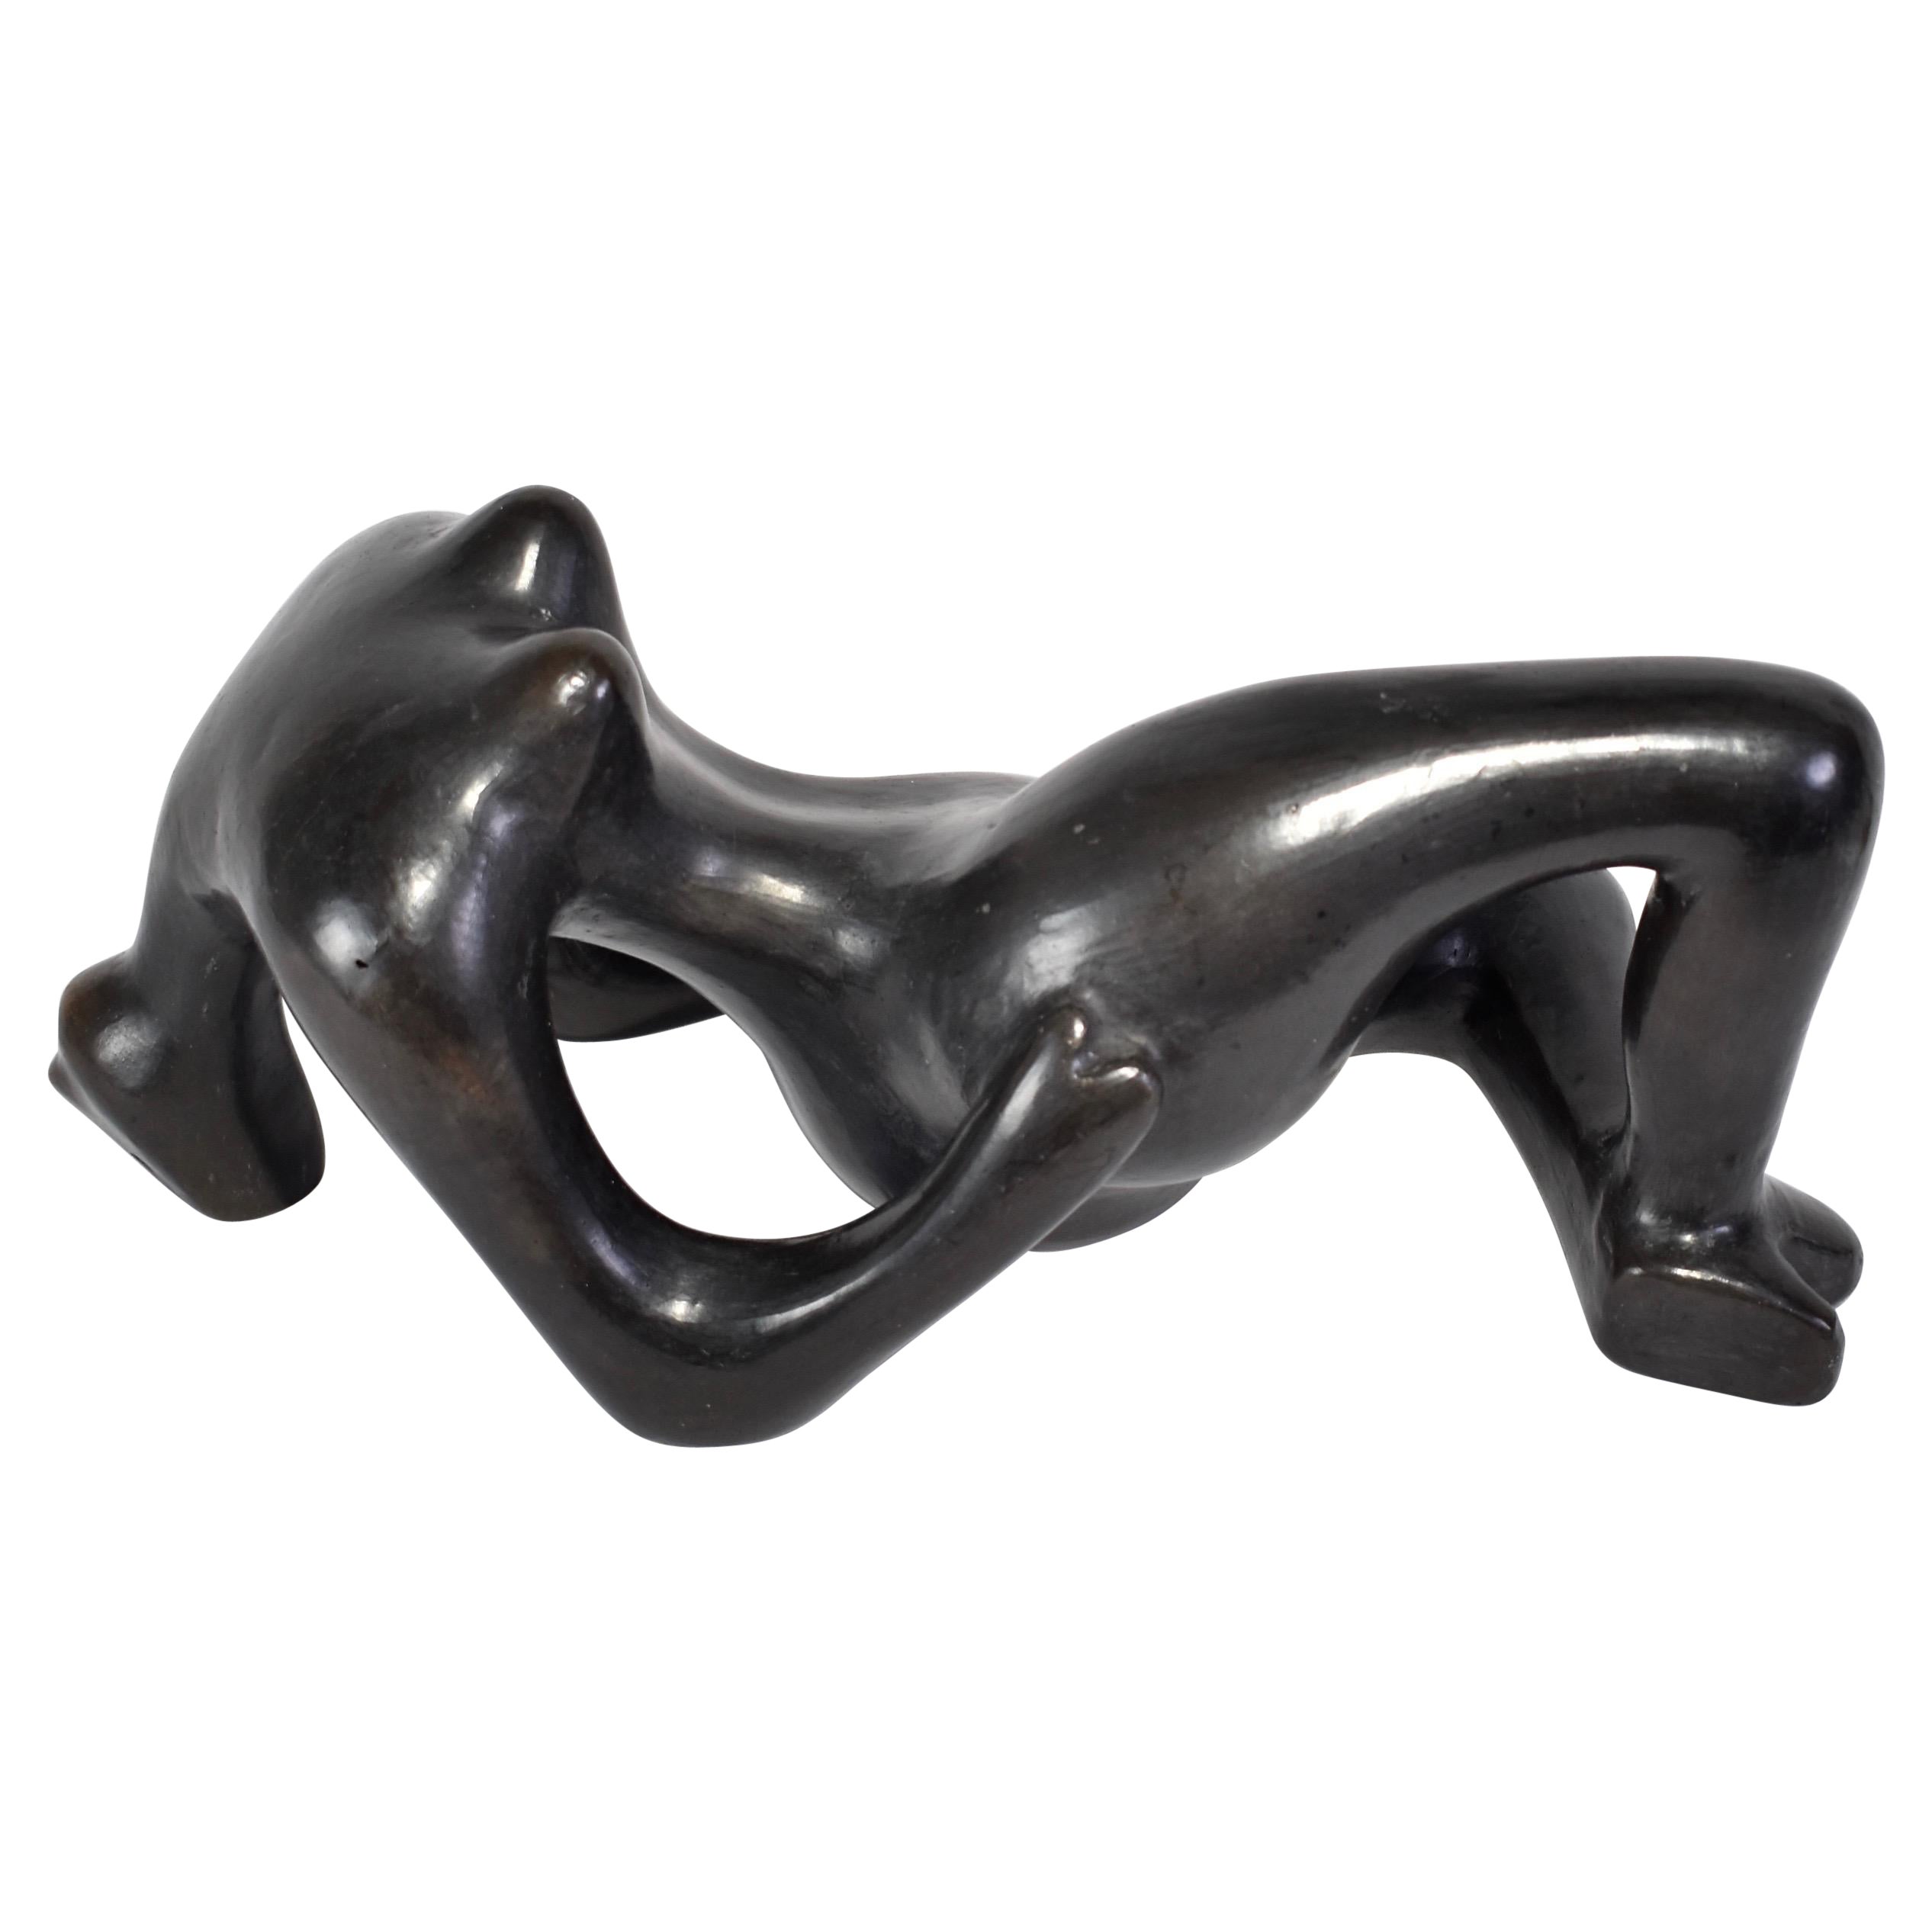 Black Ceramic 1960's Reclining Figure Sculpture in the Style of Henry Moore